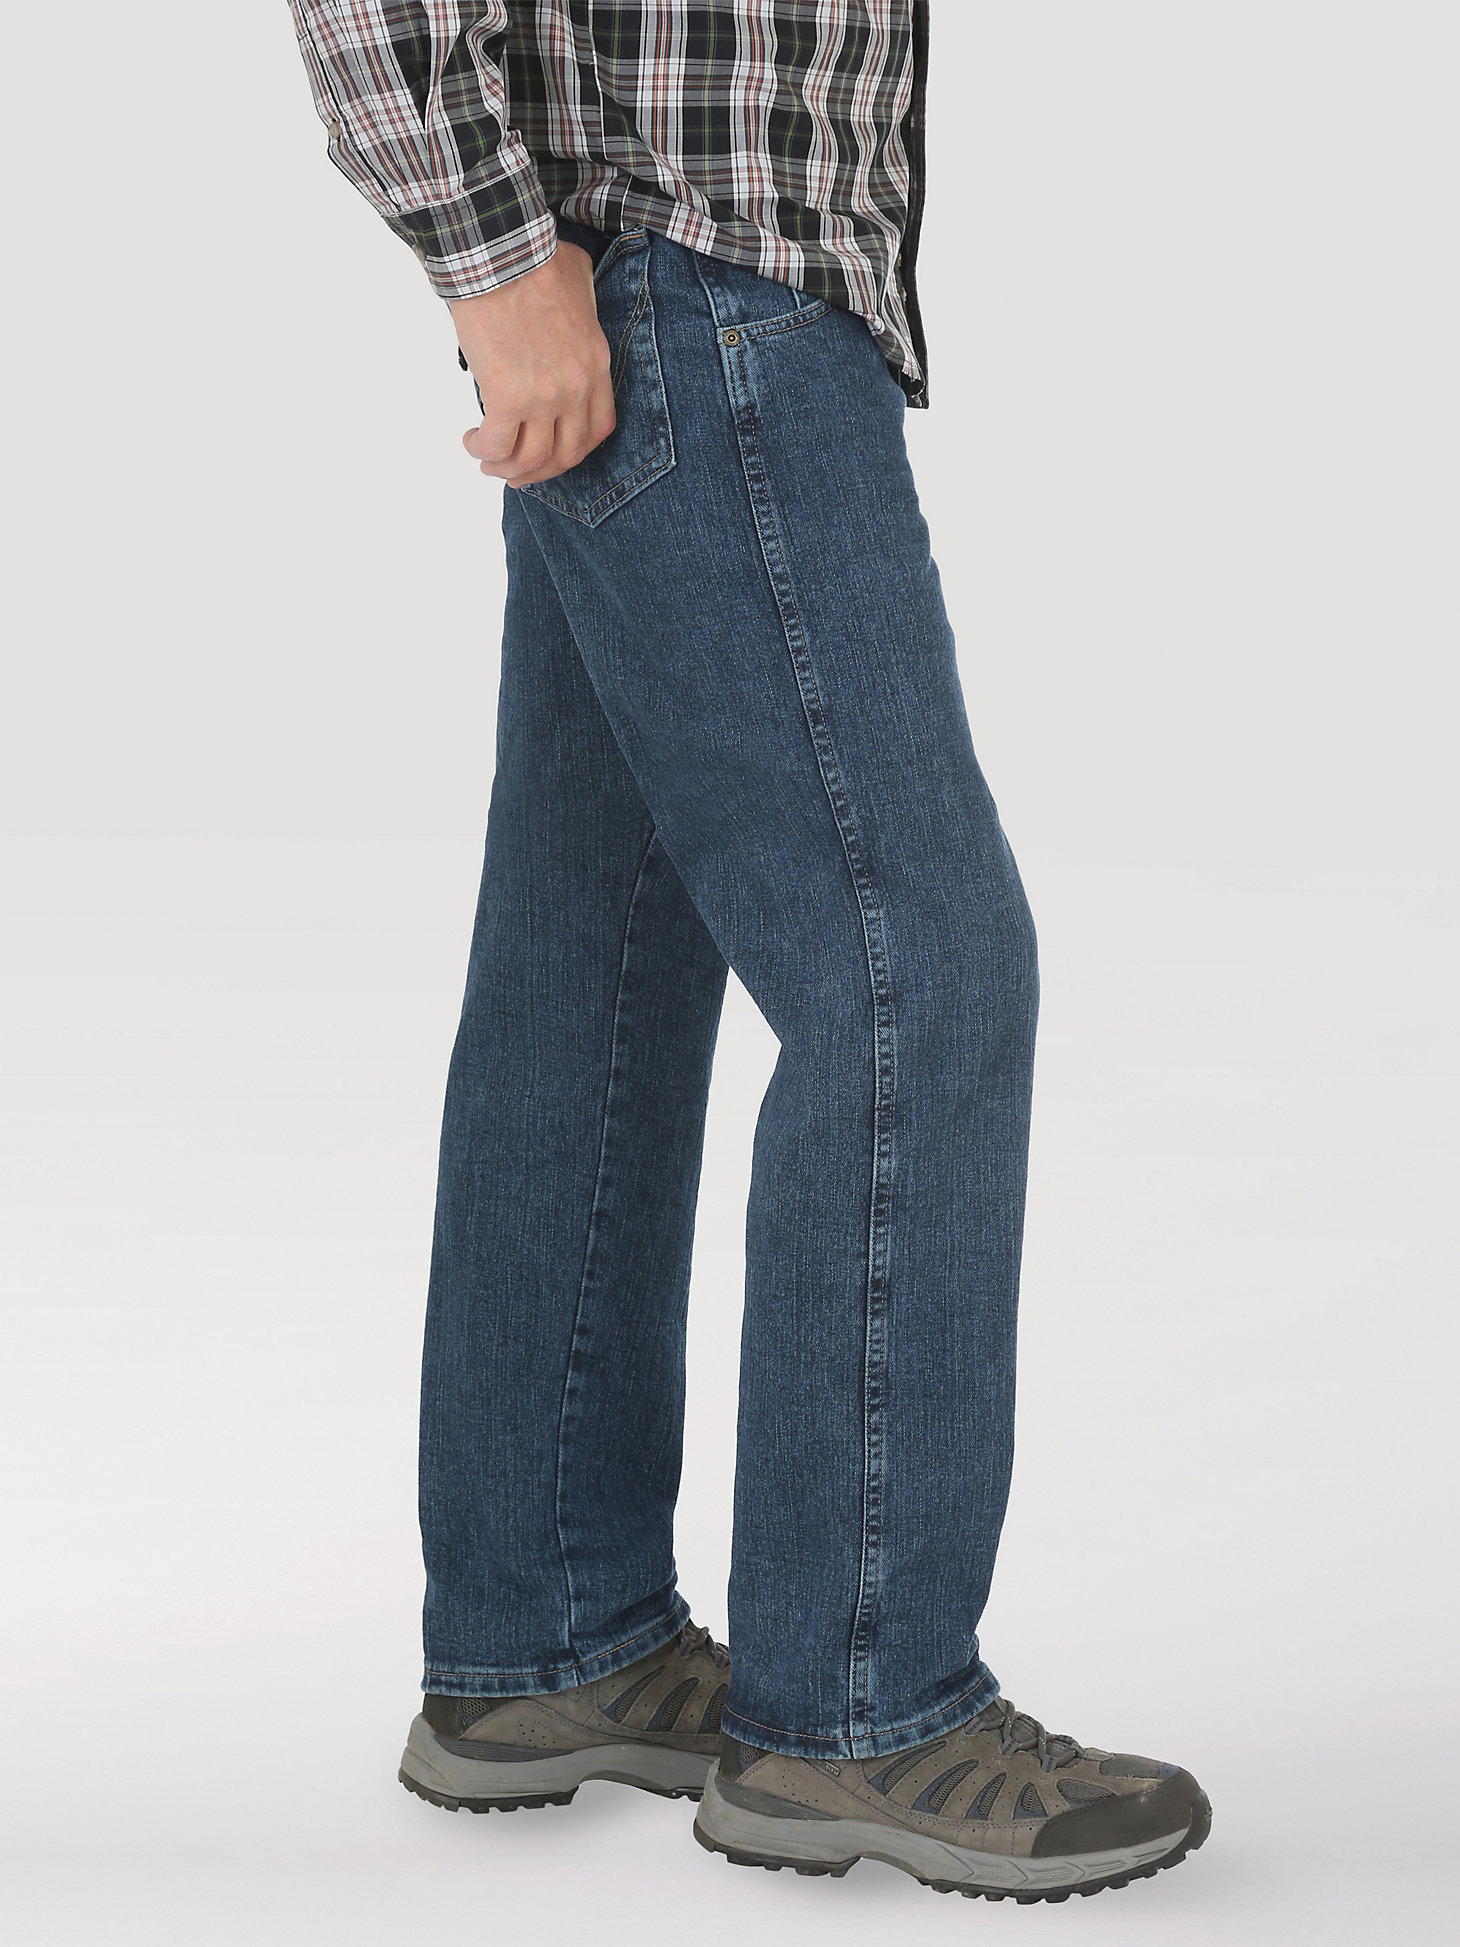 Wrangler Rugged Wear® Performance Series Relaxed Fit Jean in Medium Stone alternative view 1